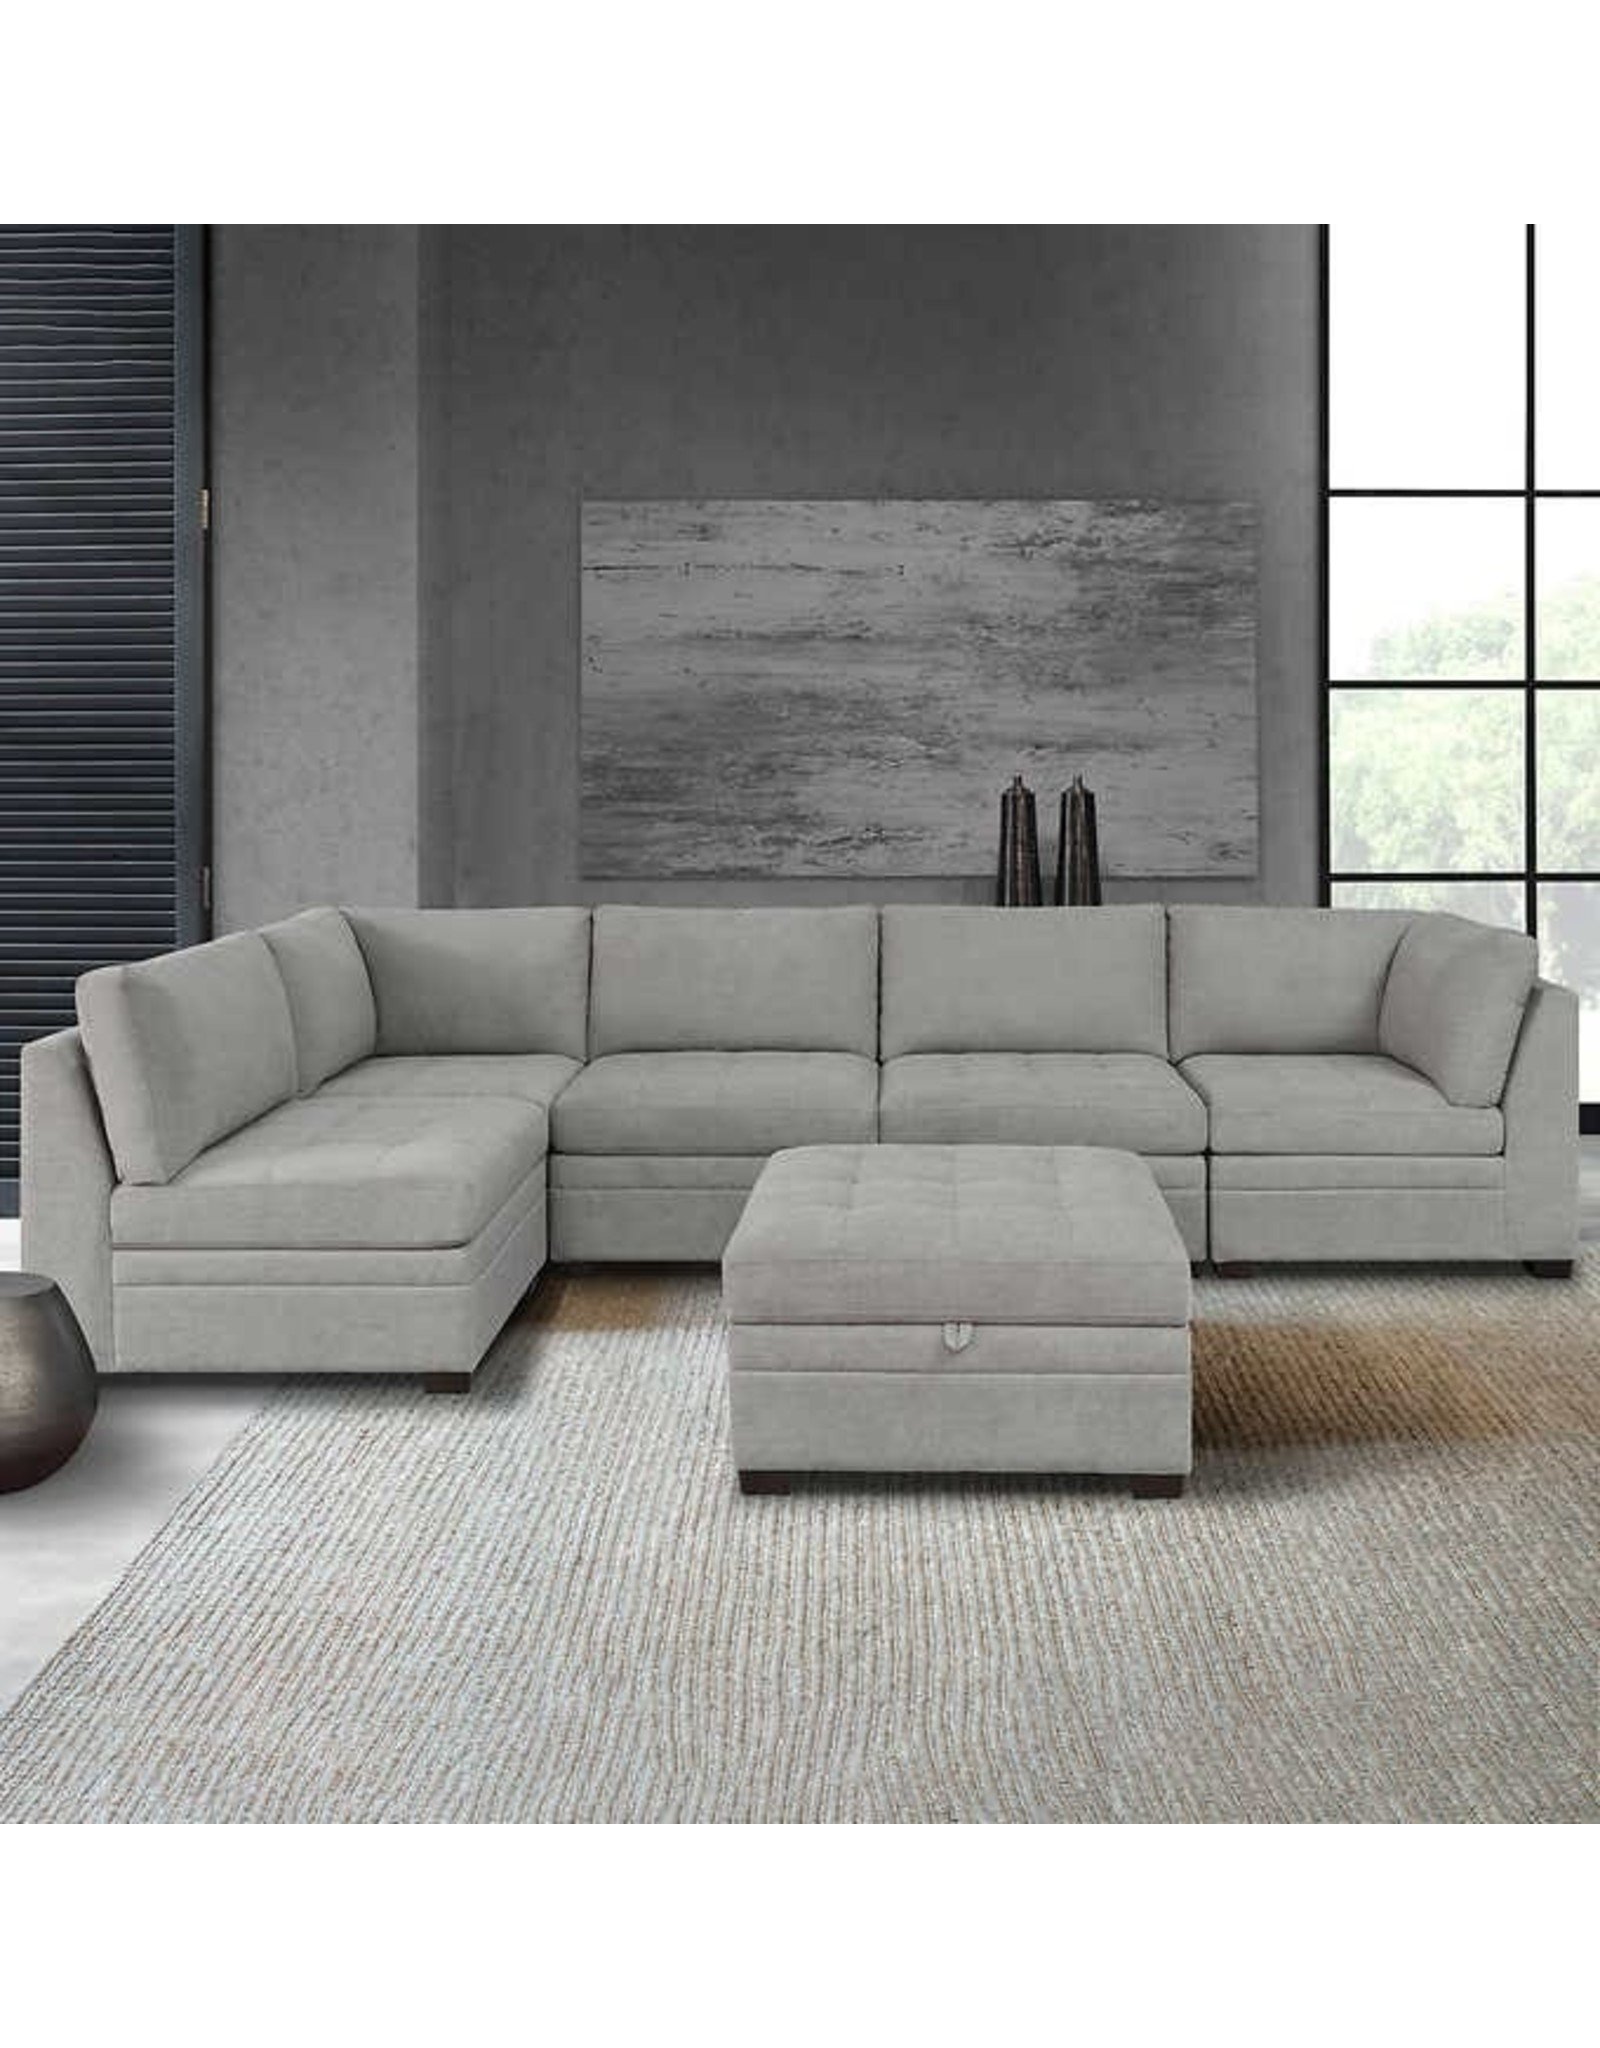 Thomasville Thomasville Tisdale Fabric Sectional with Storage Ottoman